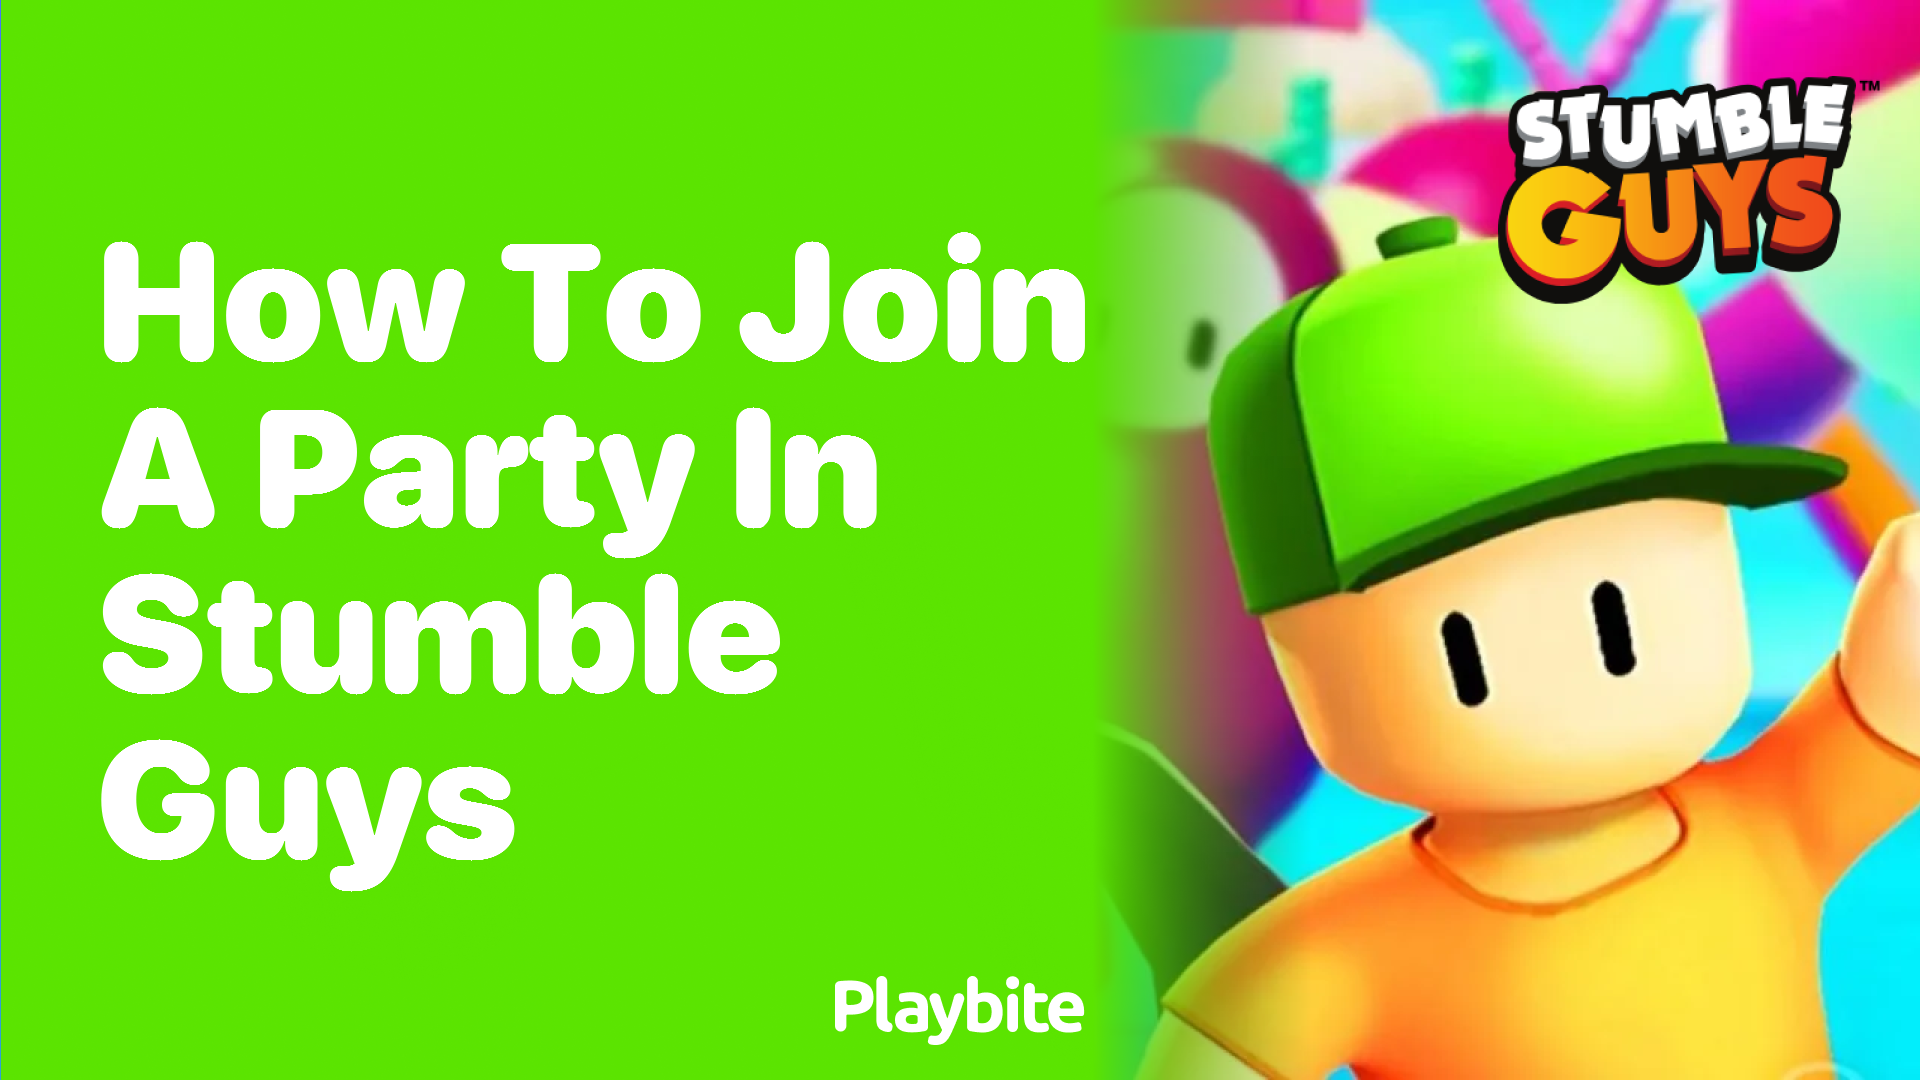 How to Join a Party in Stumble Guys